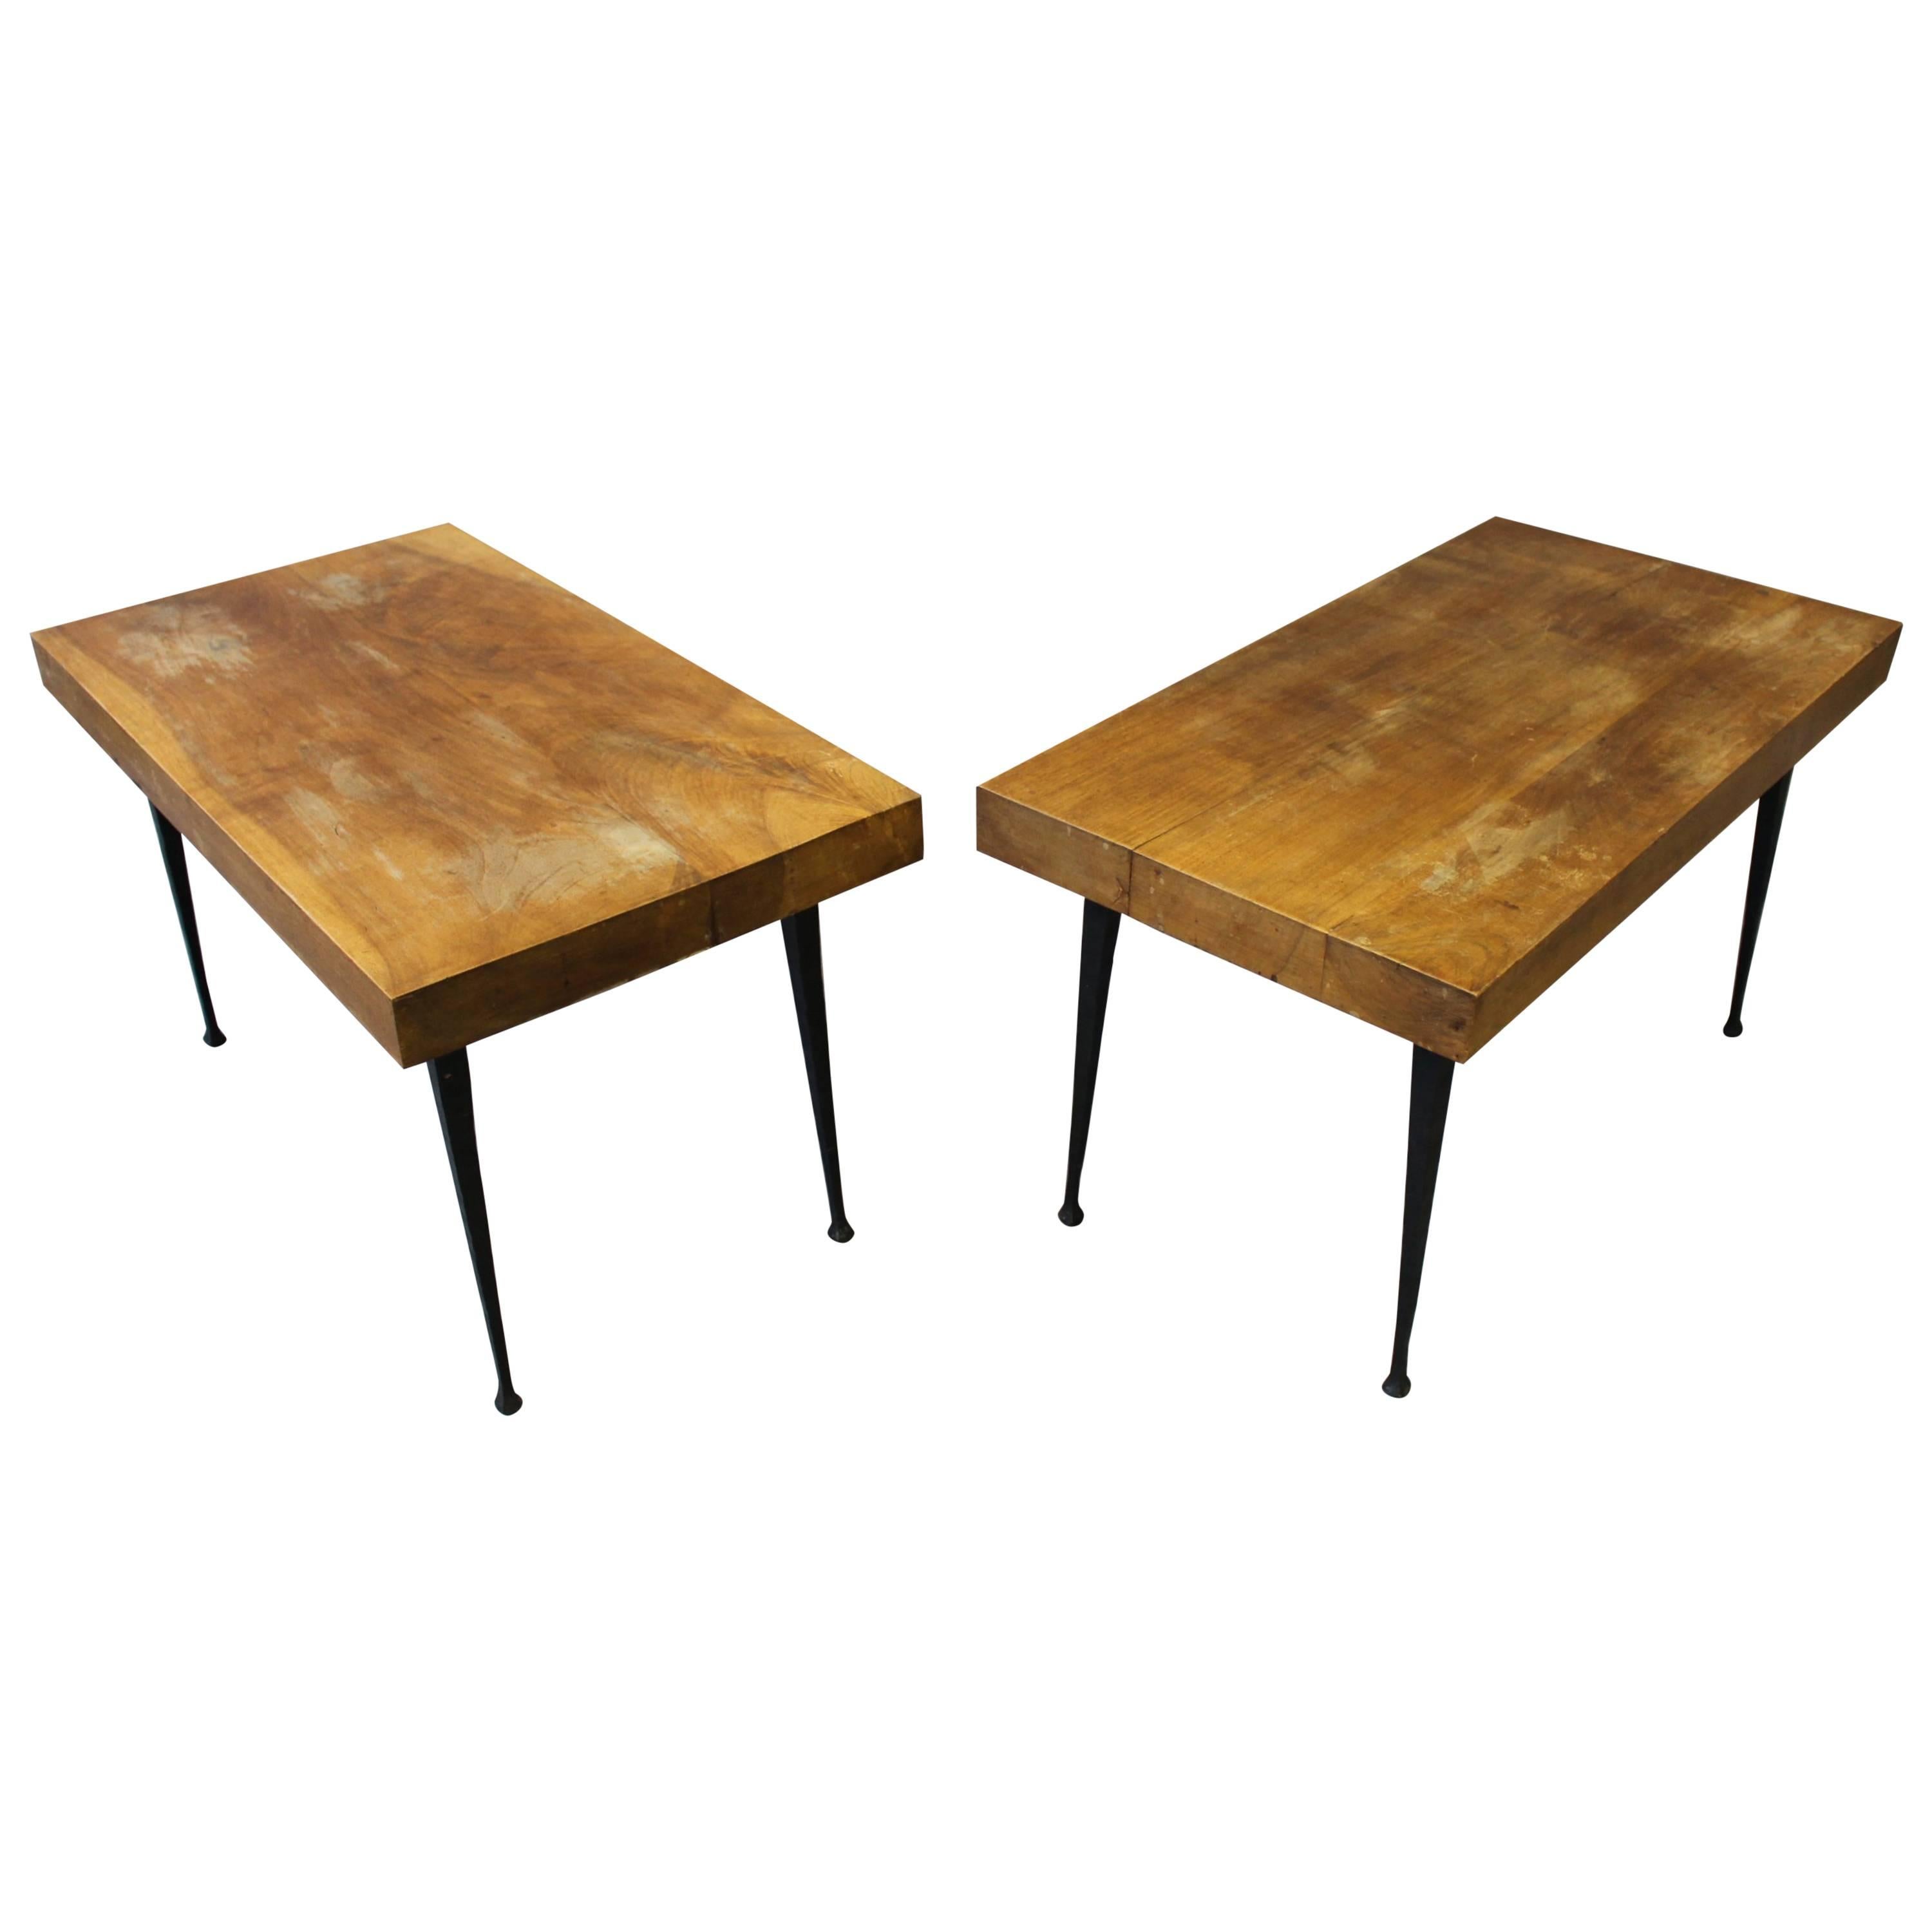 Pair of Fine French Art Deco Wrought Iron and Solid Walnut Coffee Table